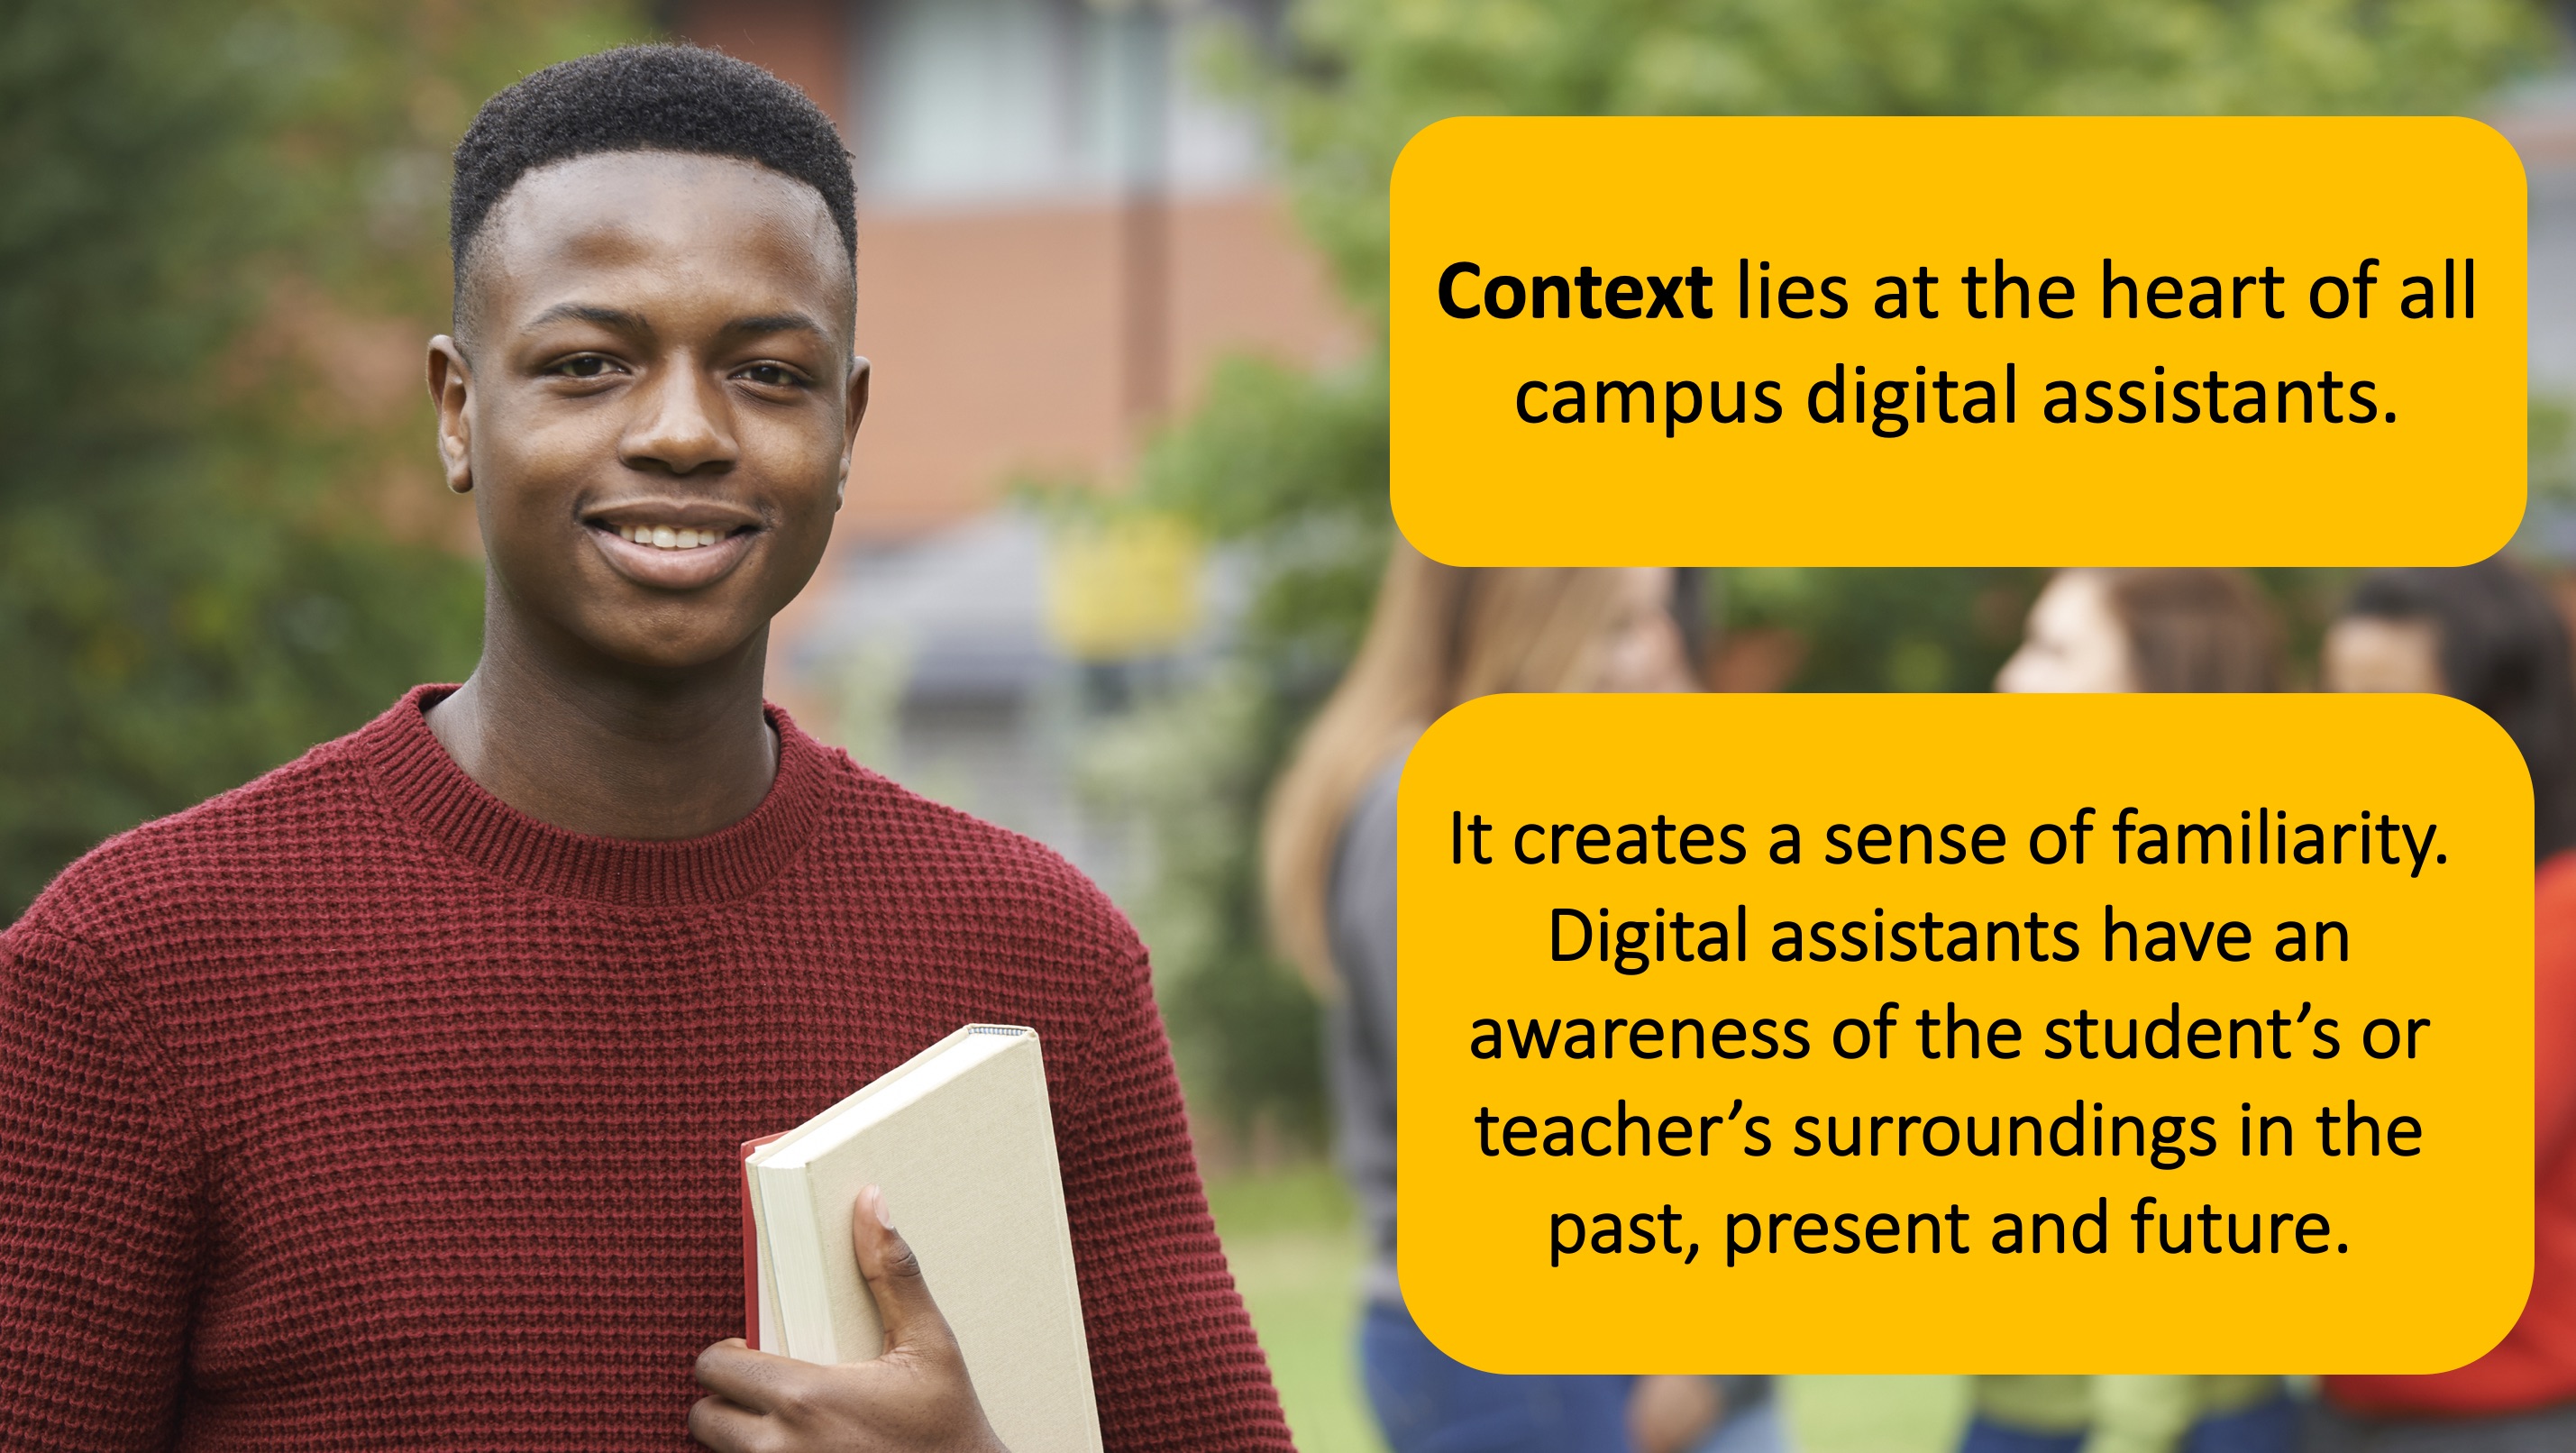 context lies at the leart of all campus digital assistants